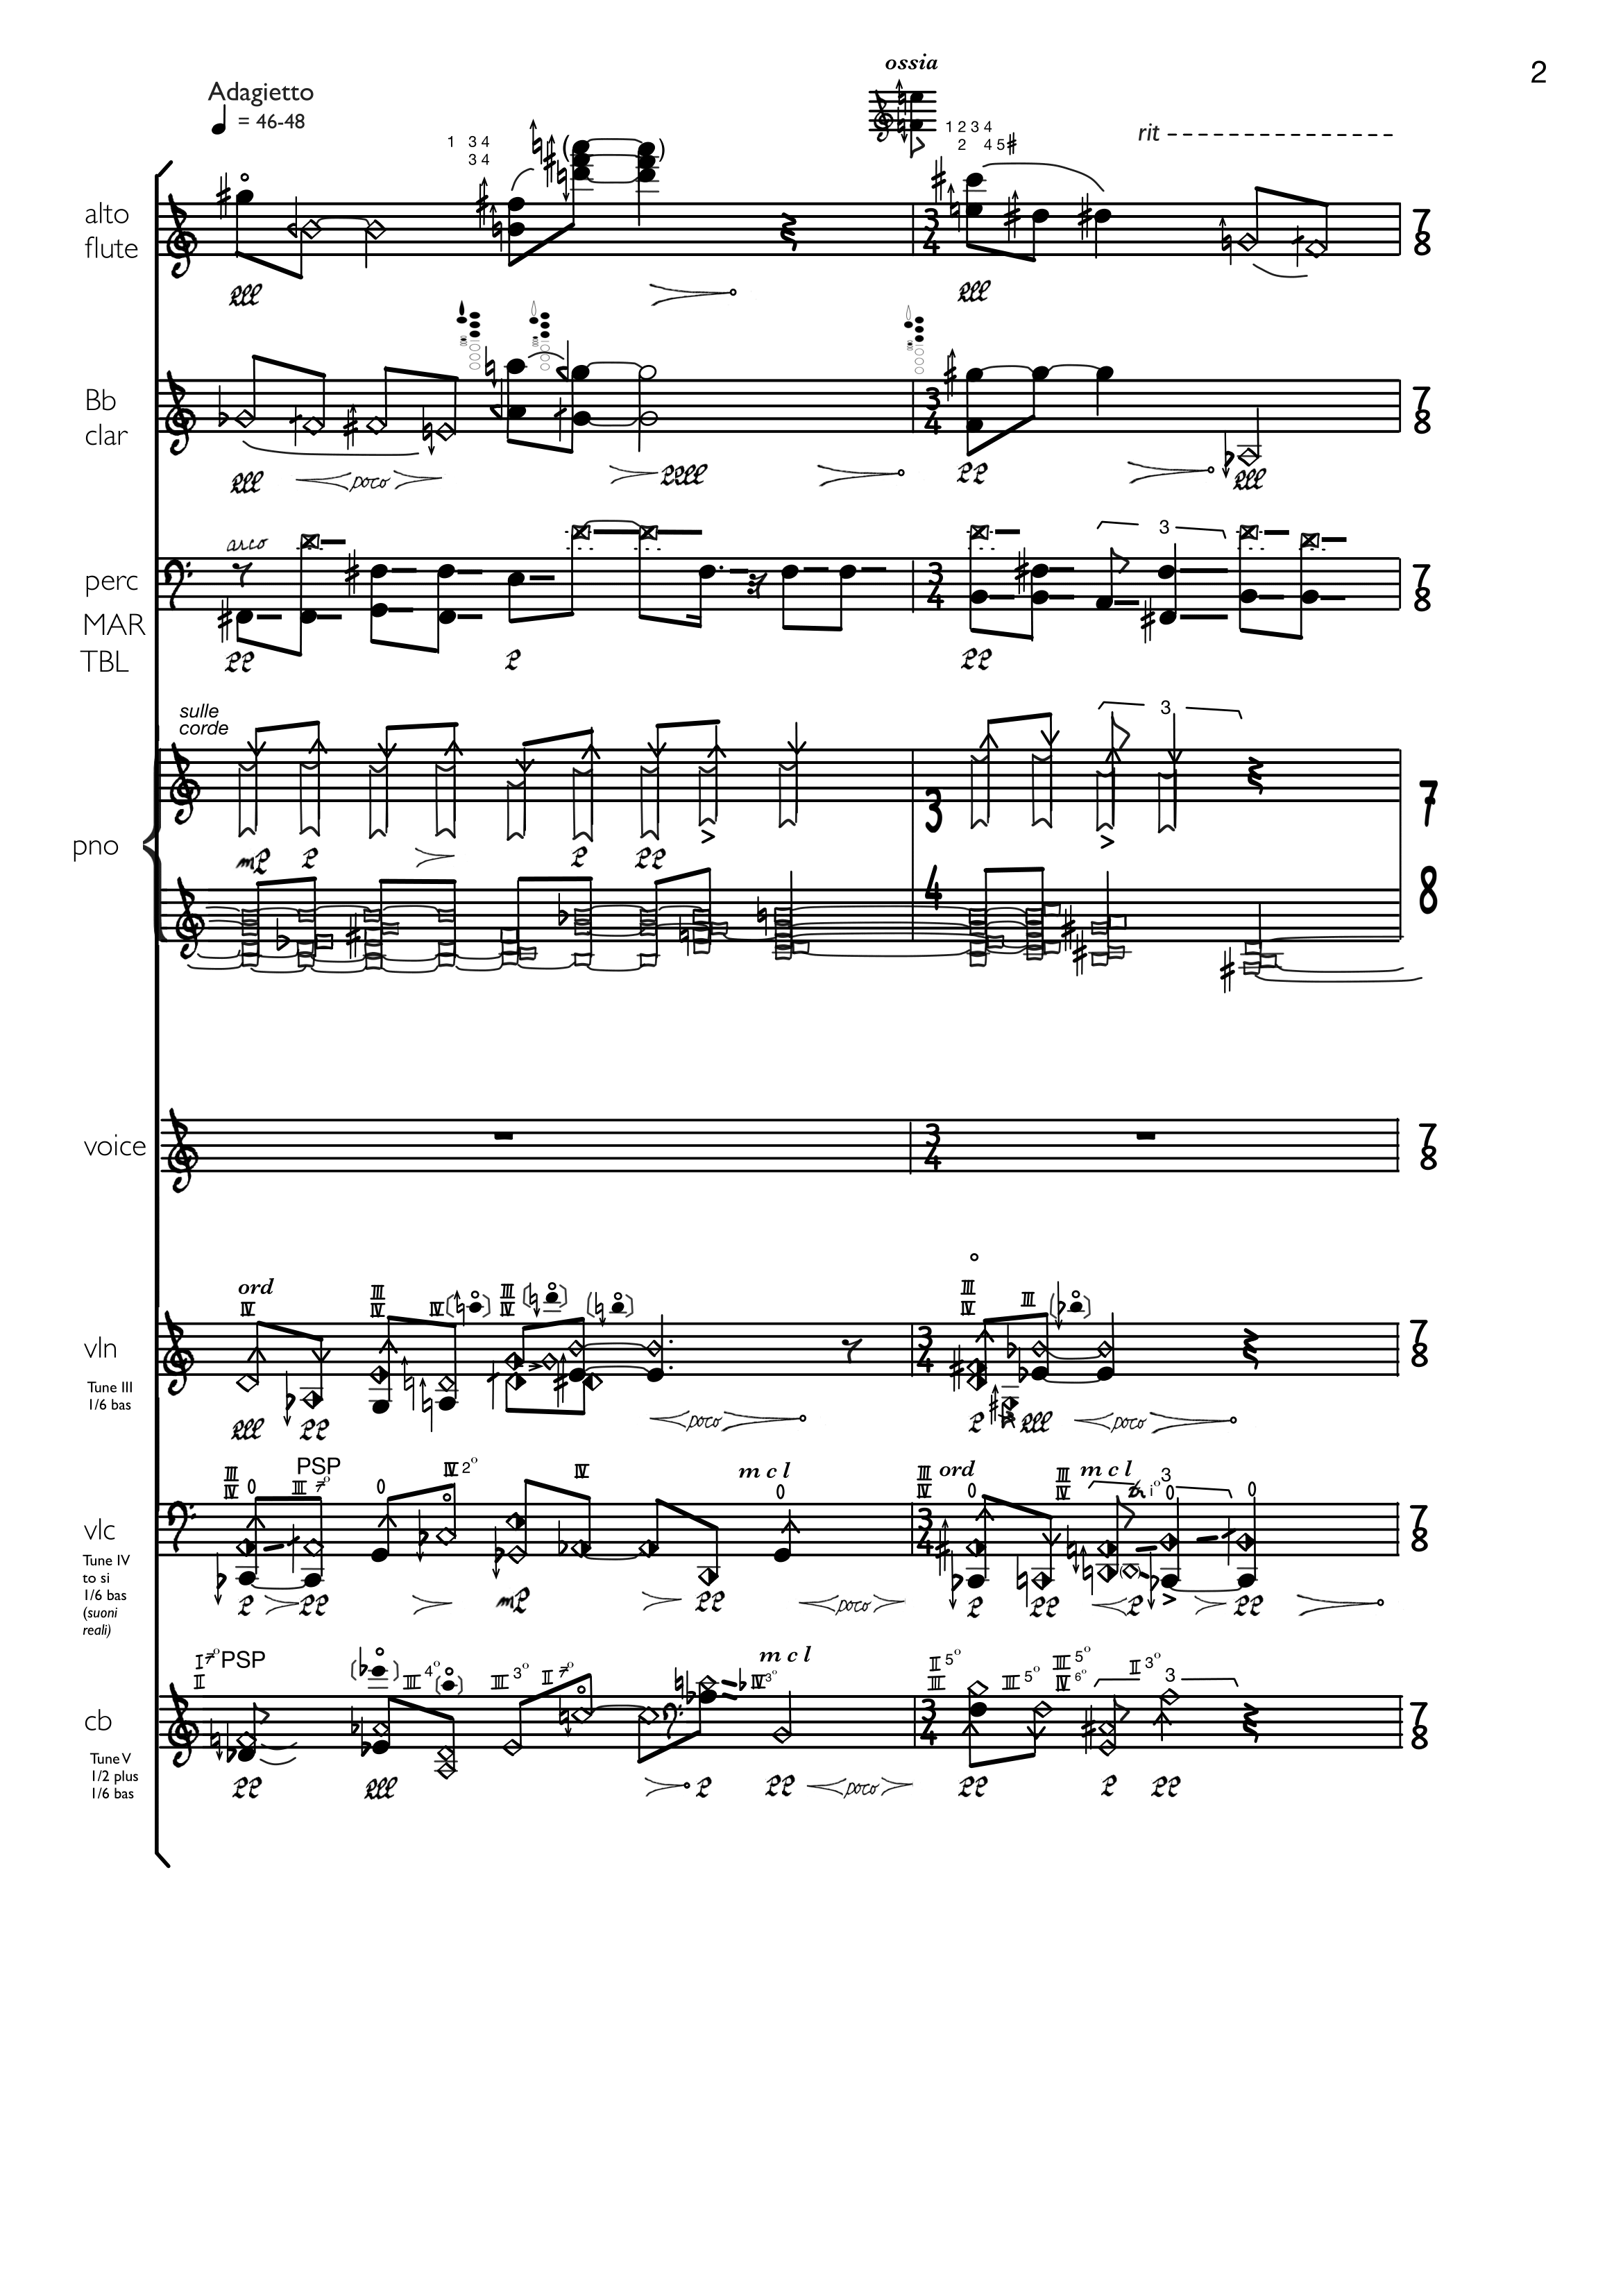 _AdasSong-score-2021version-02.png